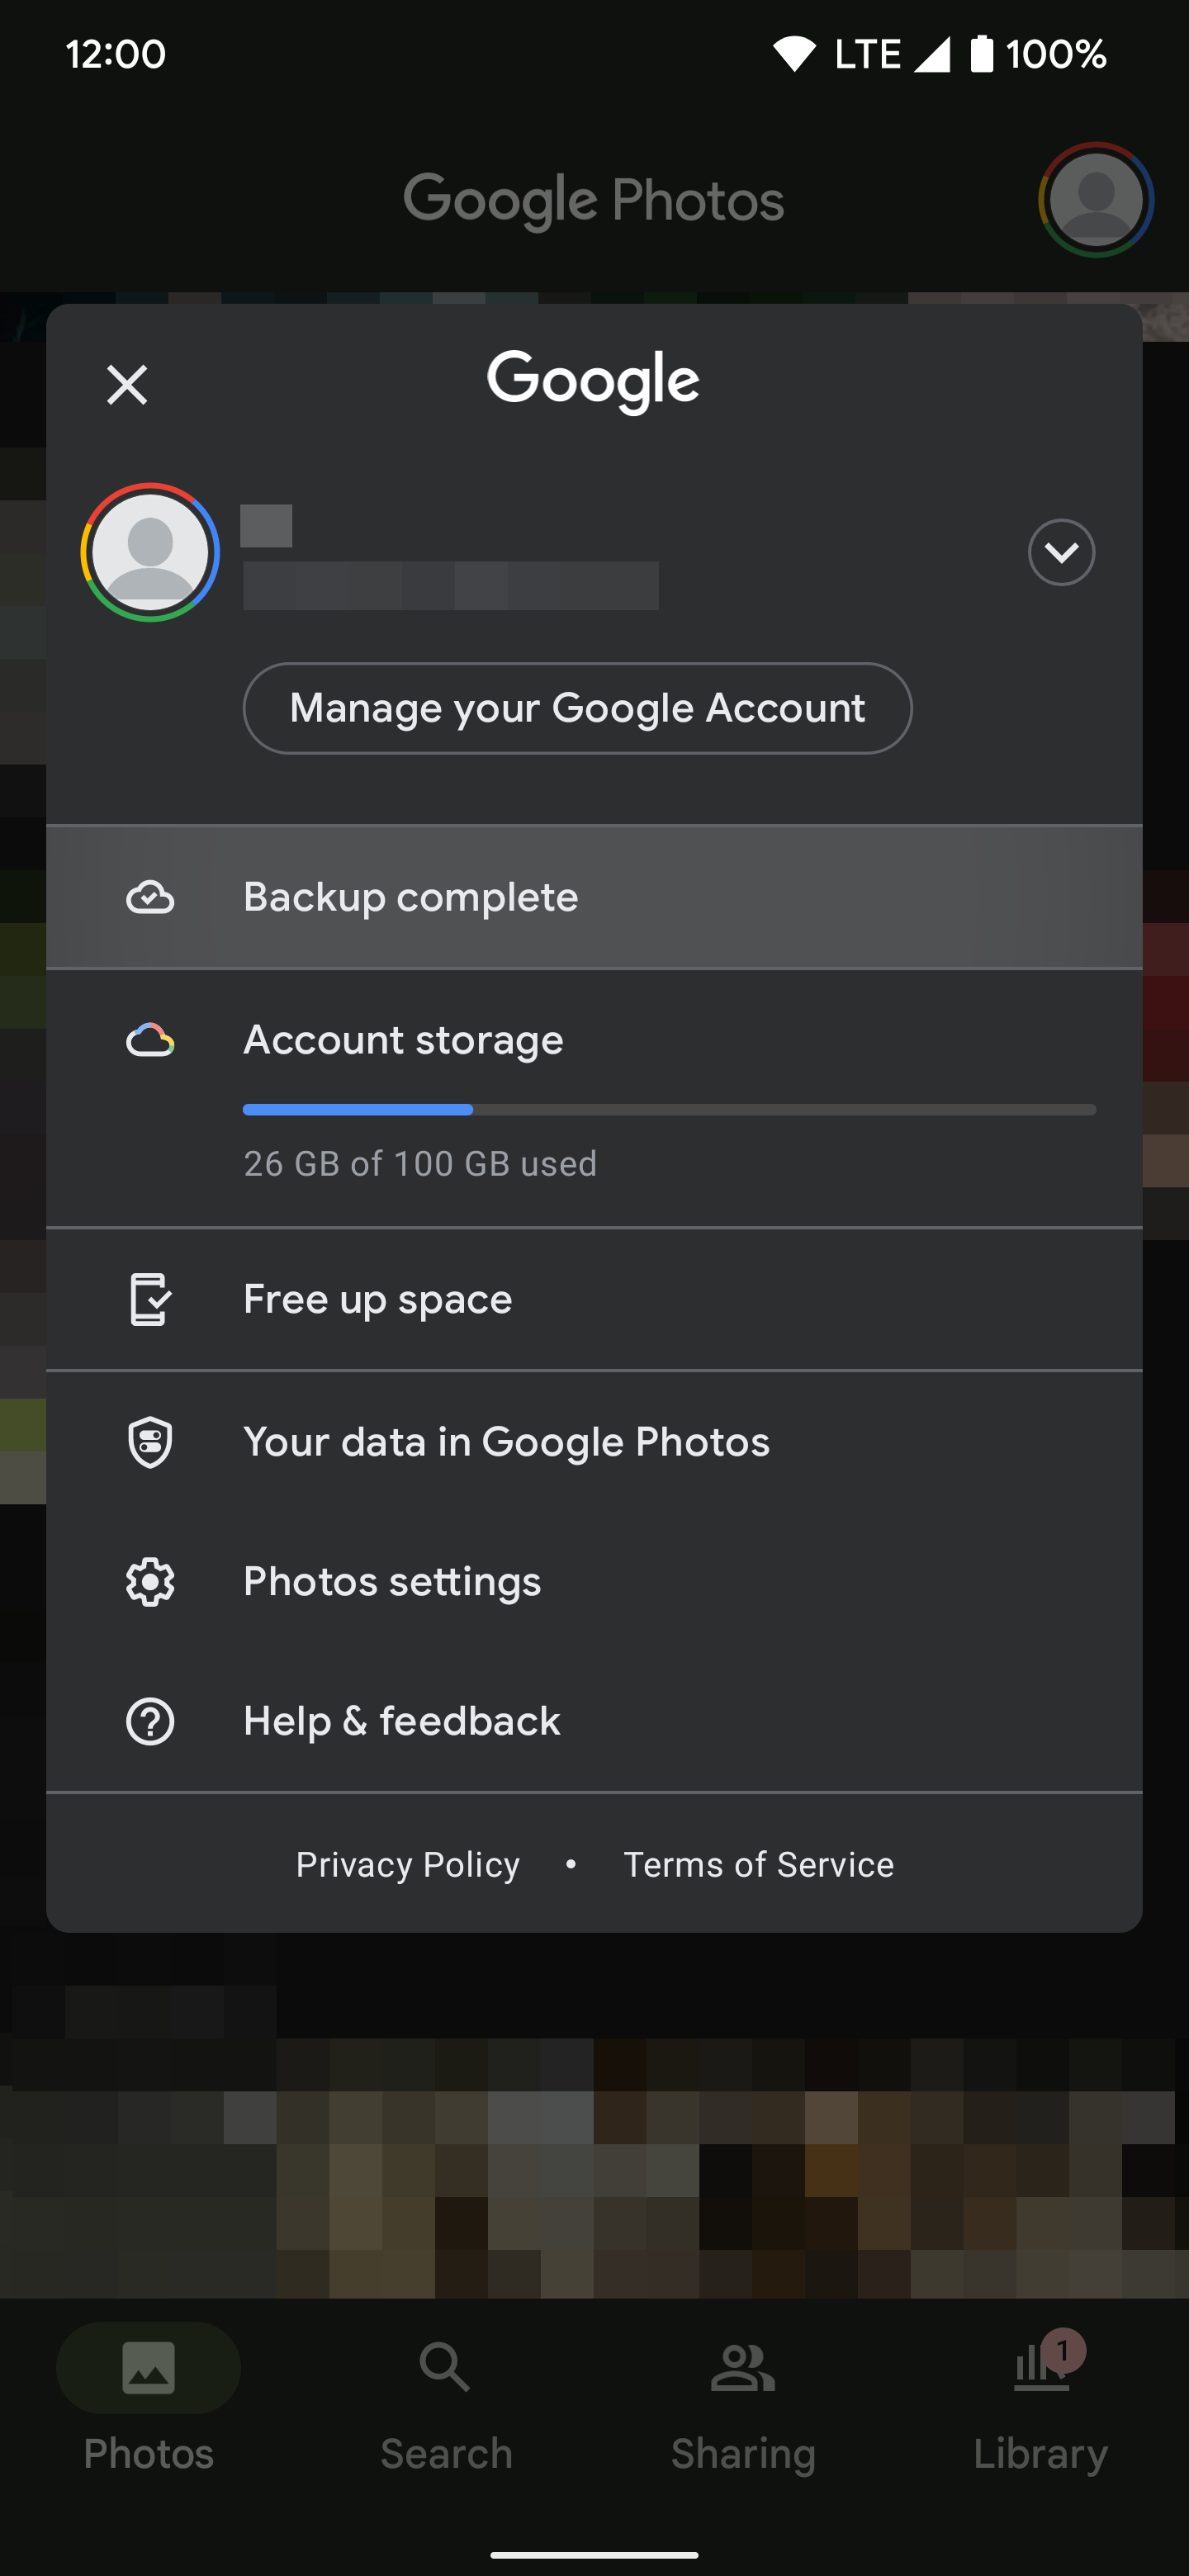 The file upload is now done for the Google Photos app with a status showing it's complete